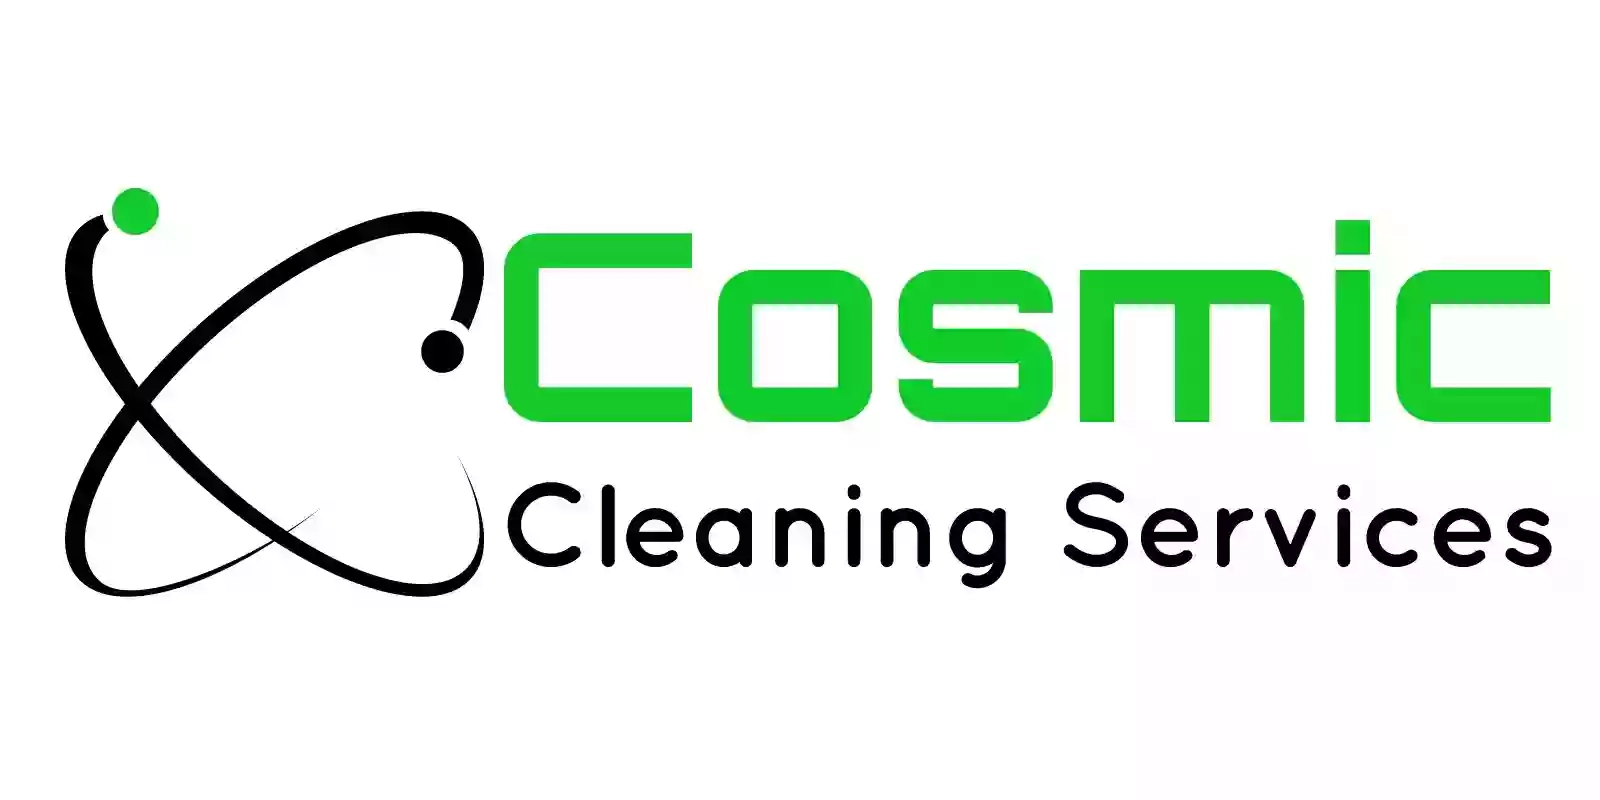 Cosmic Cleaning